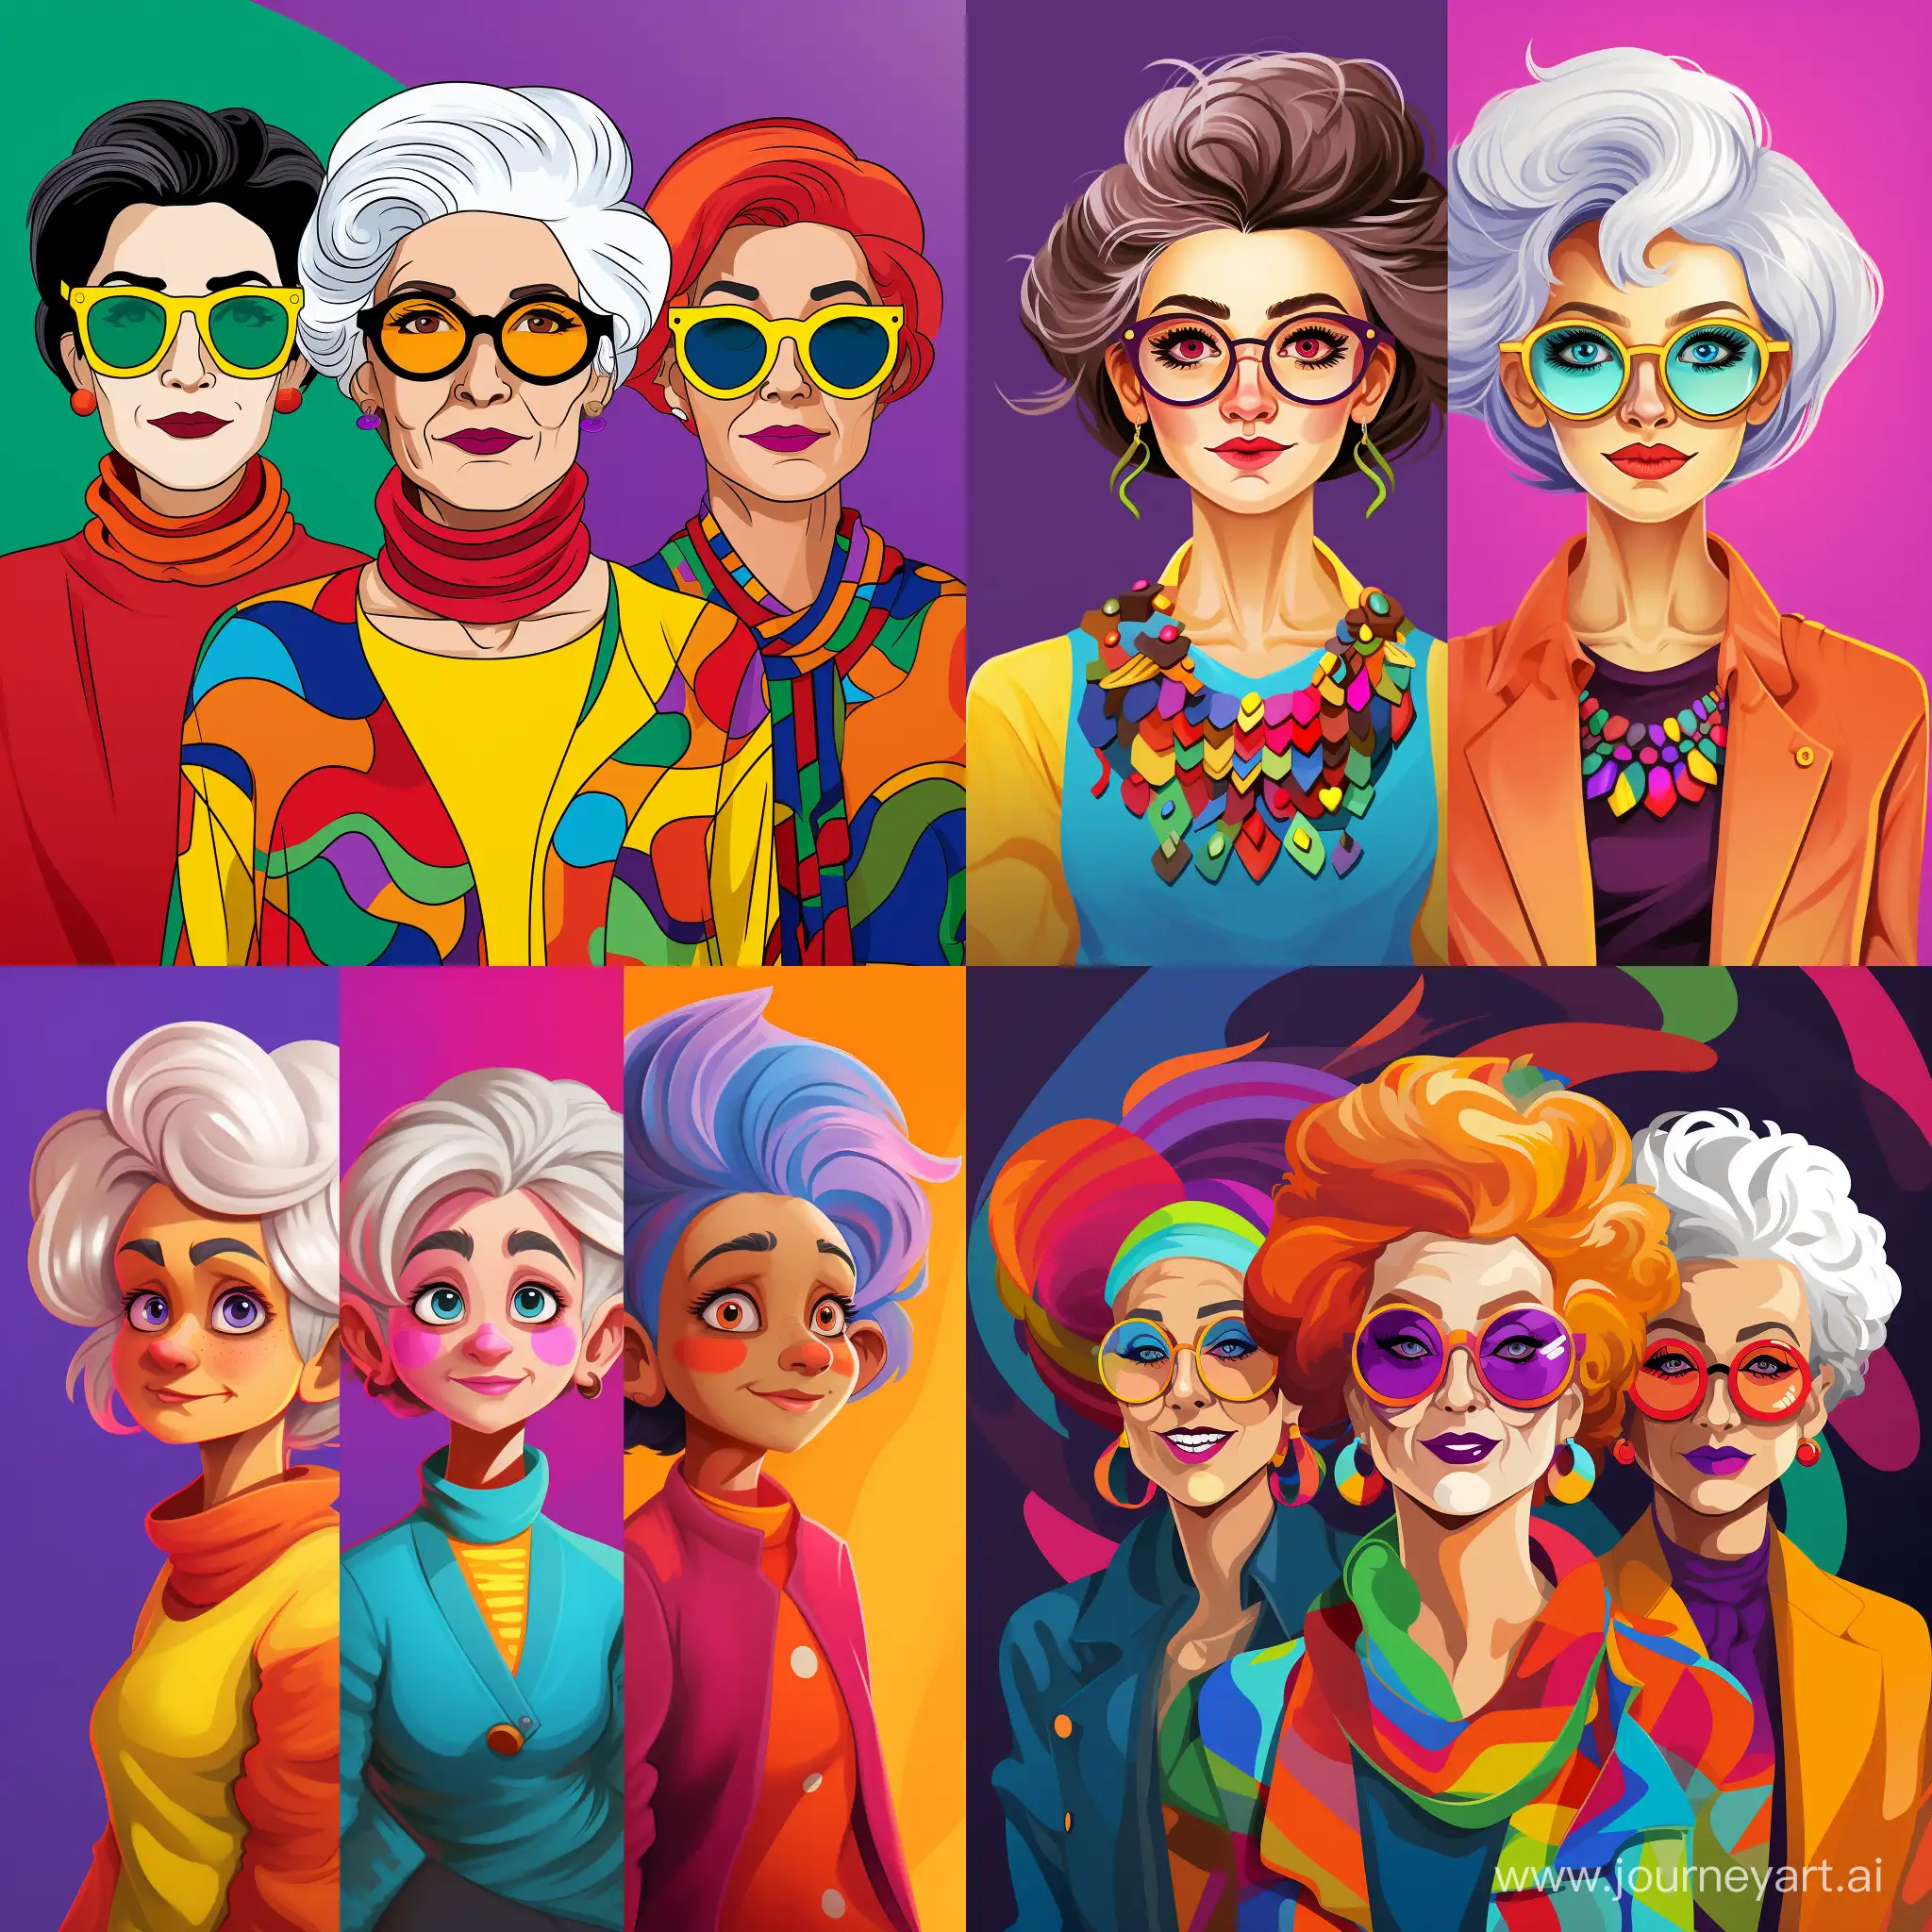 Colourful cartoon style of the same woman as a 5 year old, 25 year old and 60 year old 